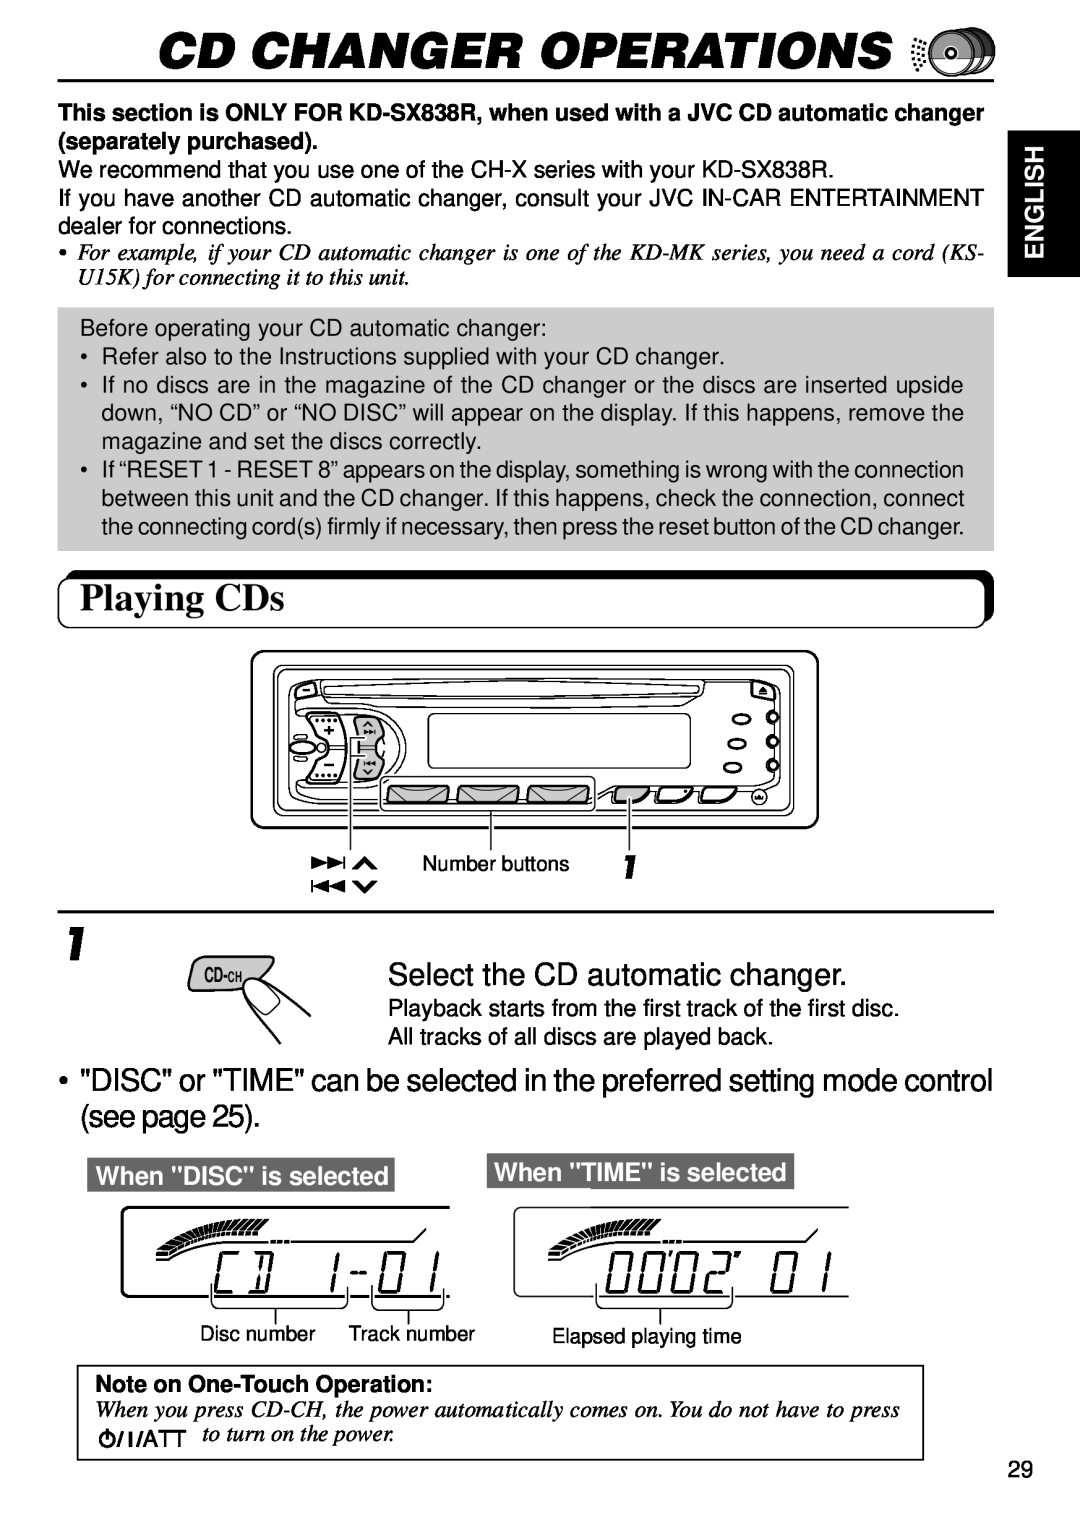 JVC KD-S707R, KD-S737R Cd Changer Operations, Playing CDs, Select the CD automatic changer, English, When DISC is selected 